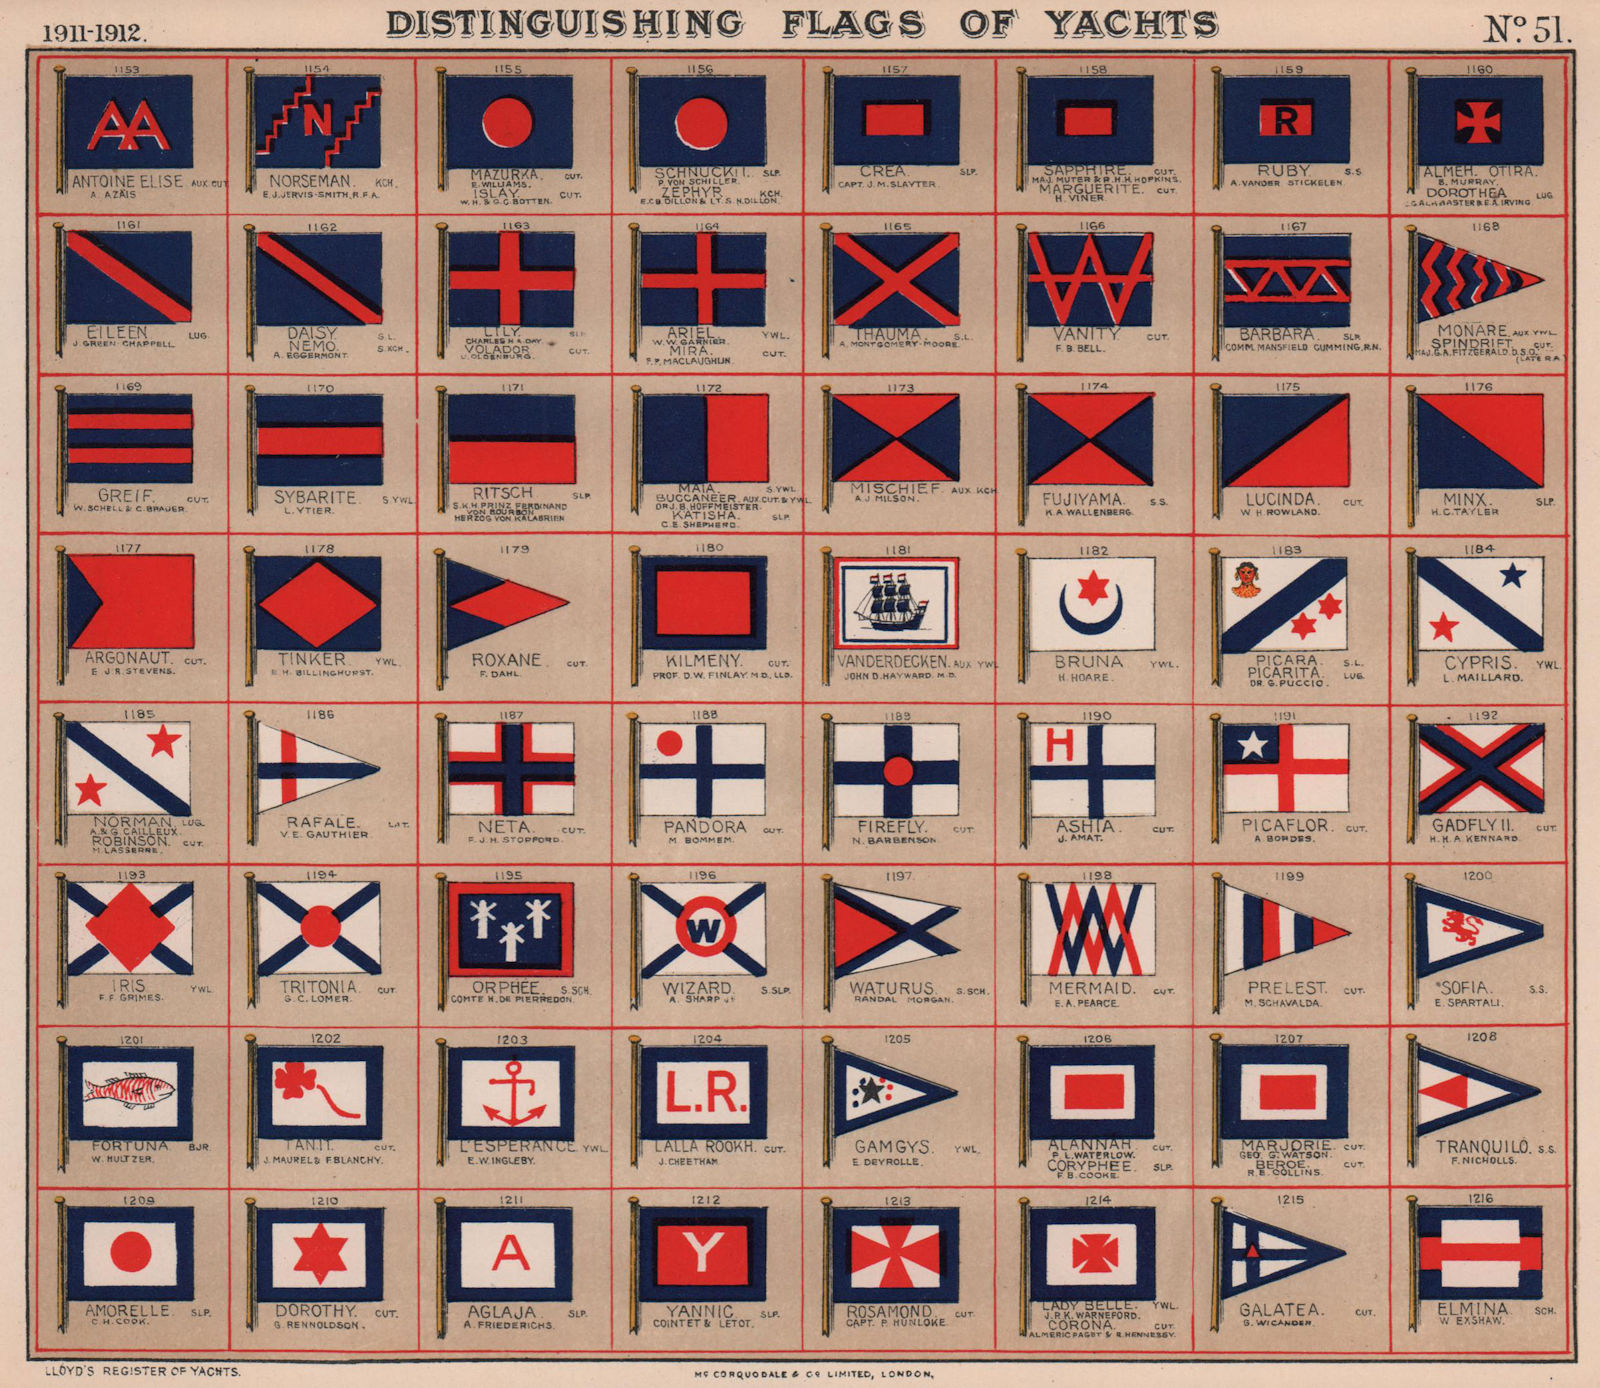 YACHT FLAGS. Blue & Red. Red, White & Blue (4) 1911 old antique print ...